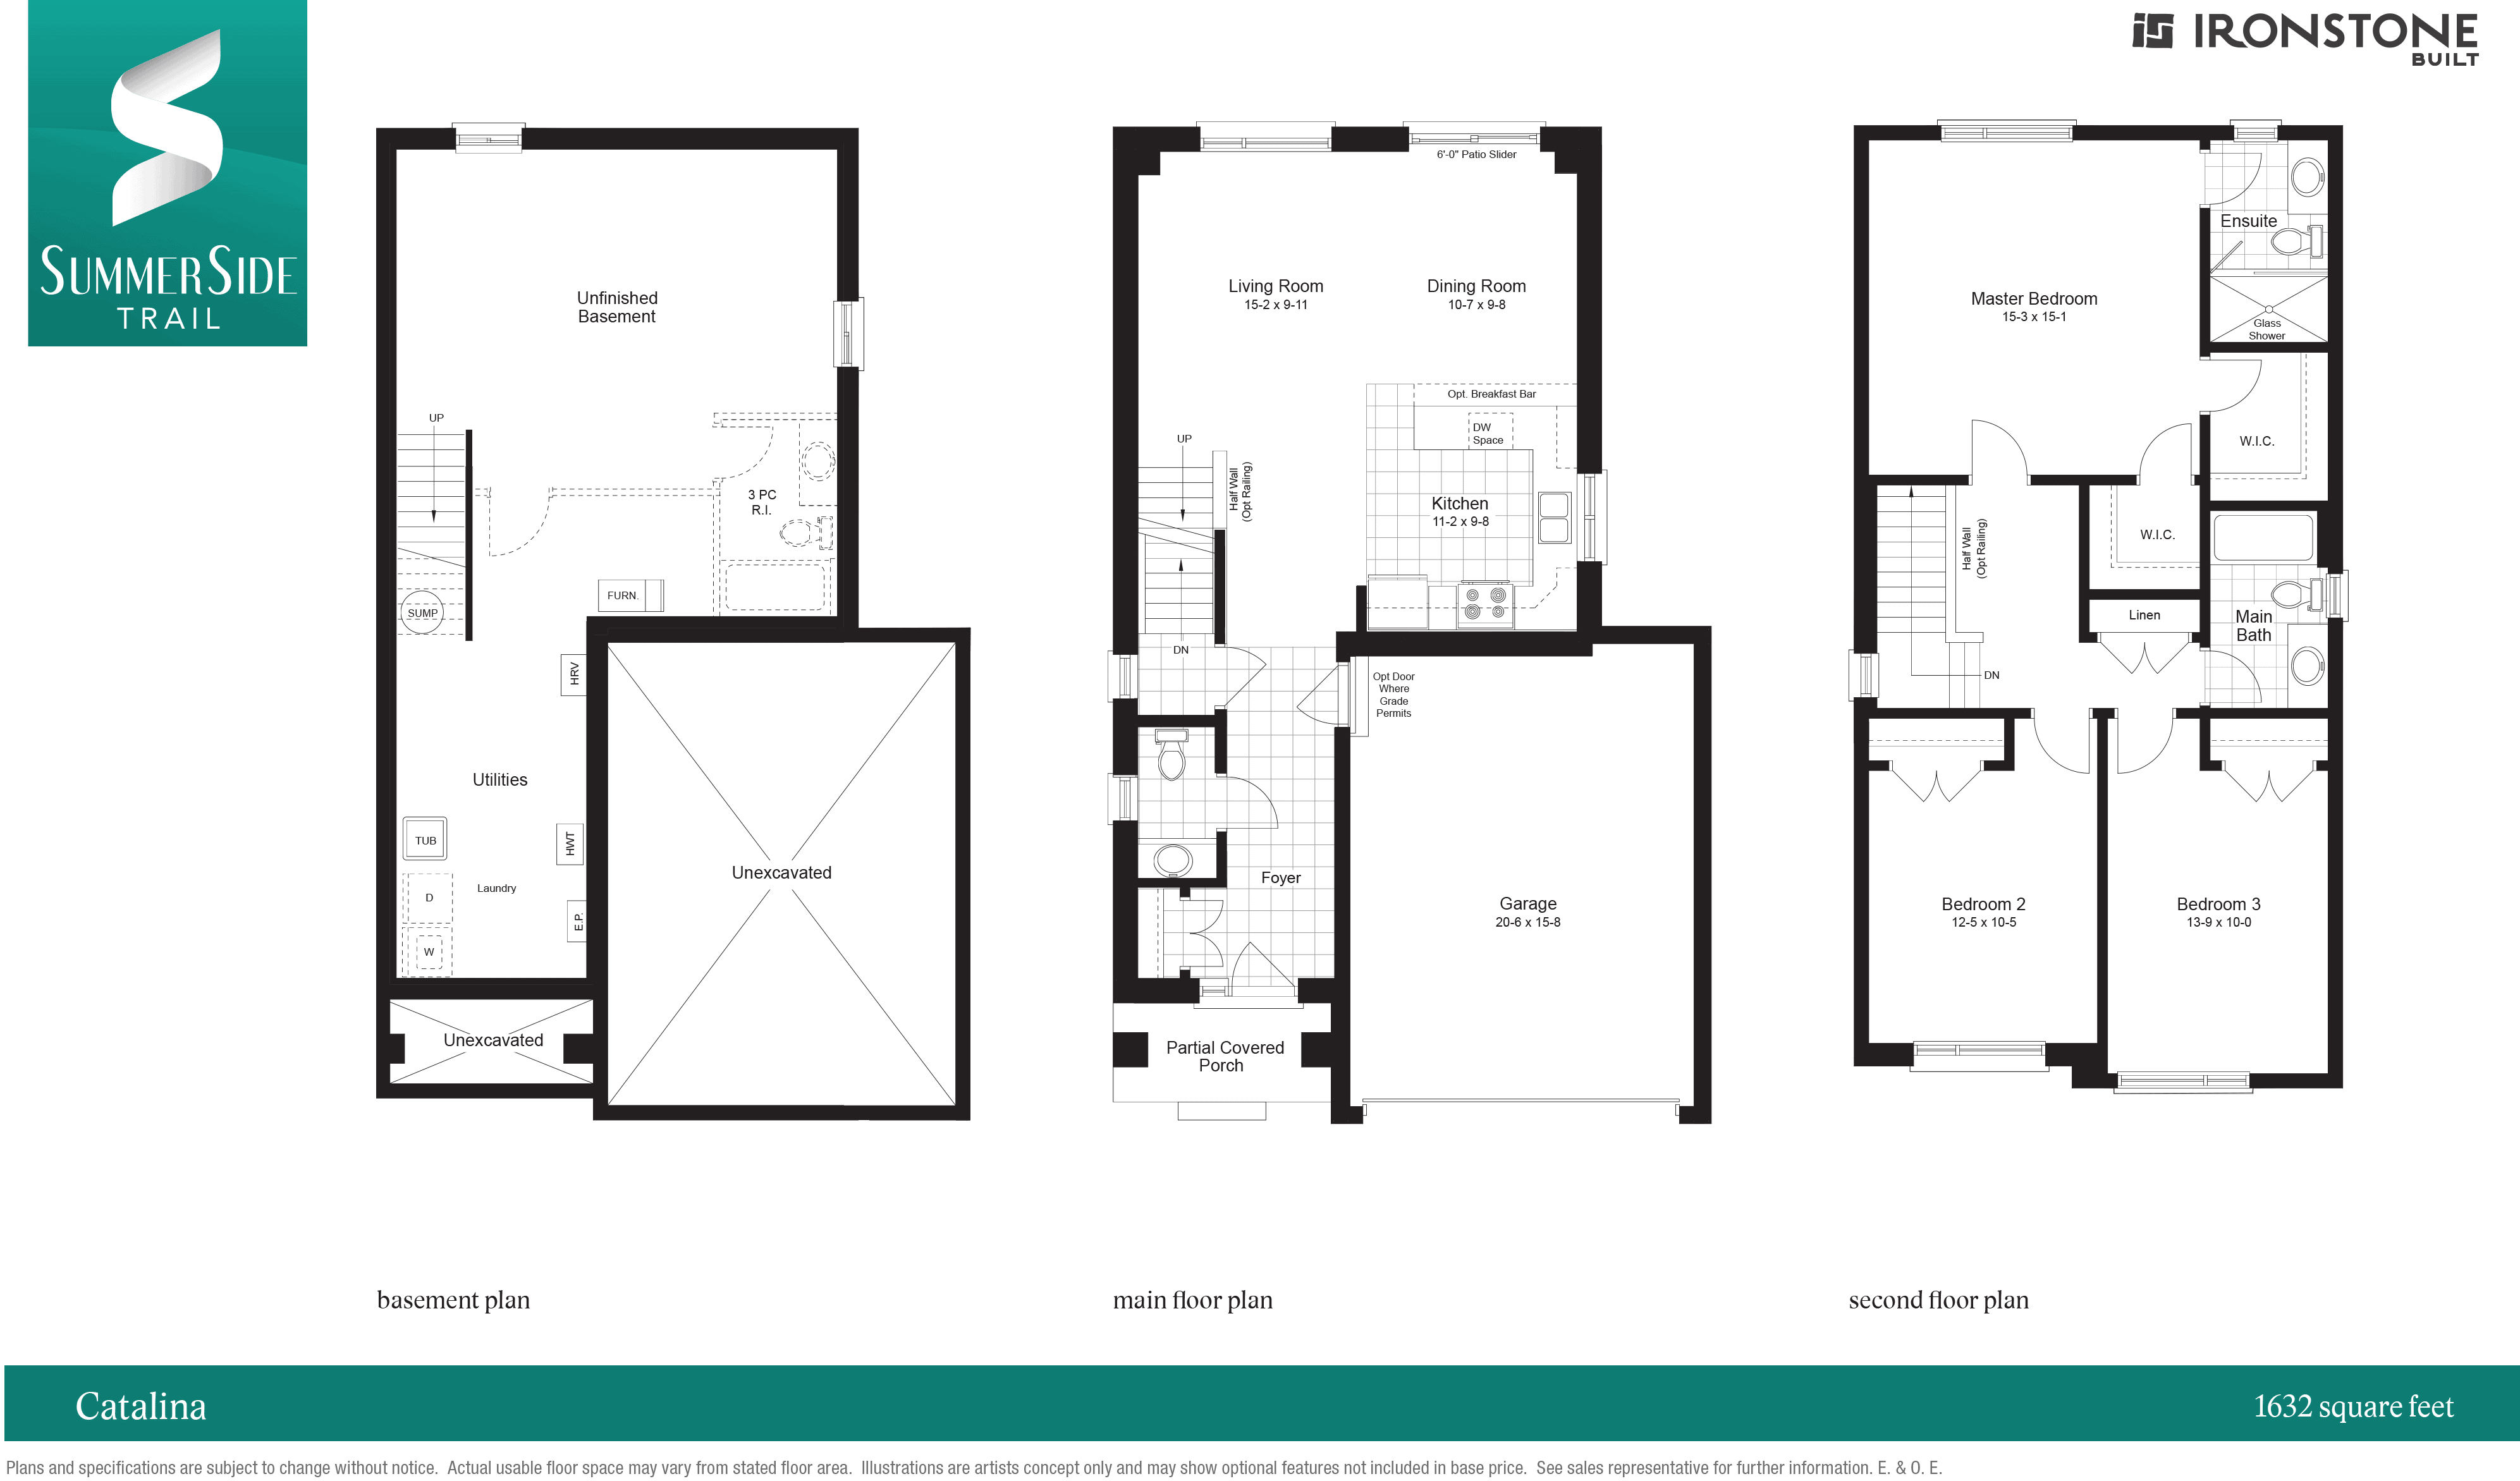 Catalina Floor Plan of Summerside Trail II with undefined beds